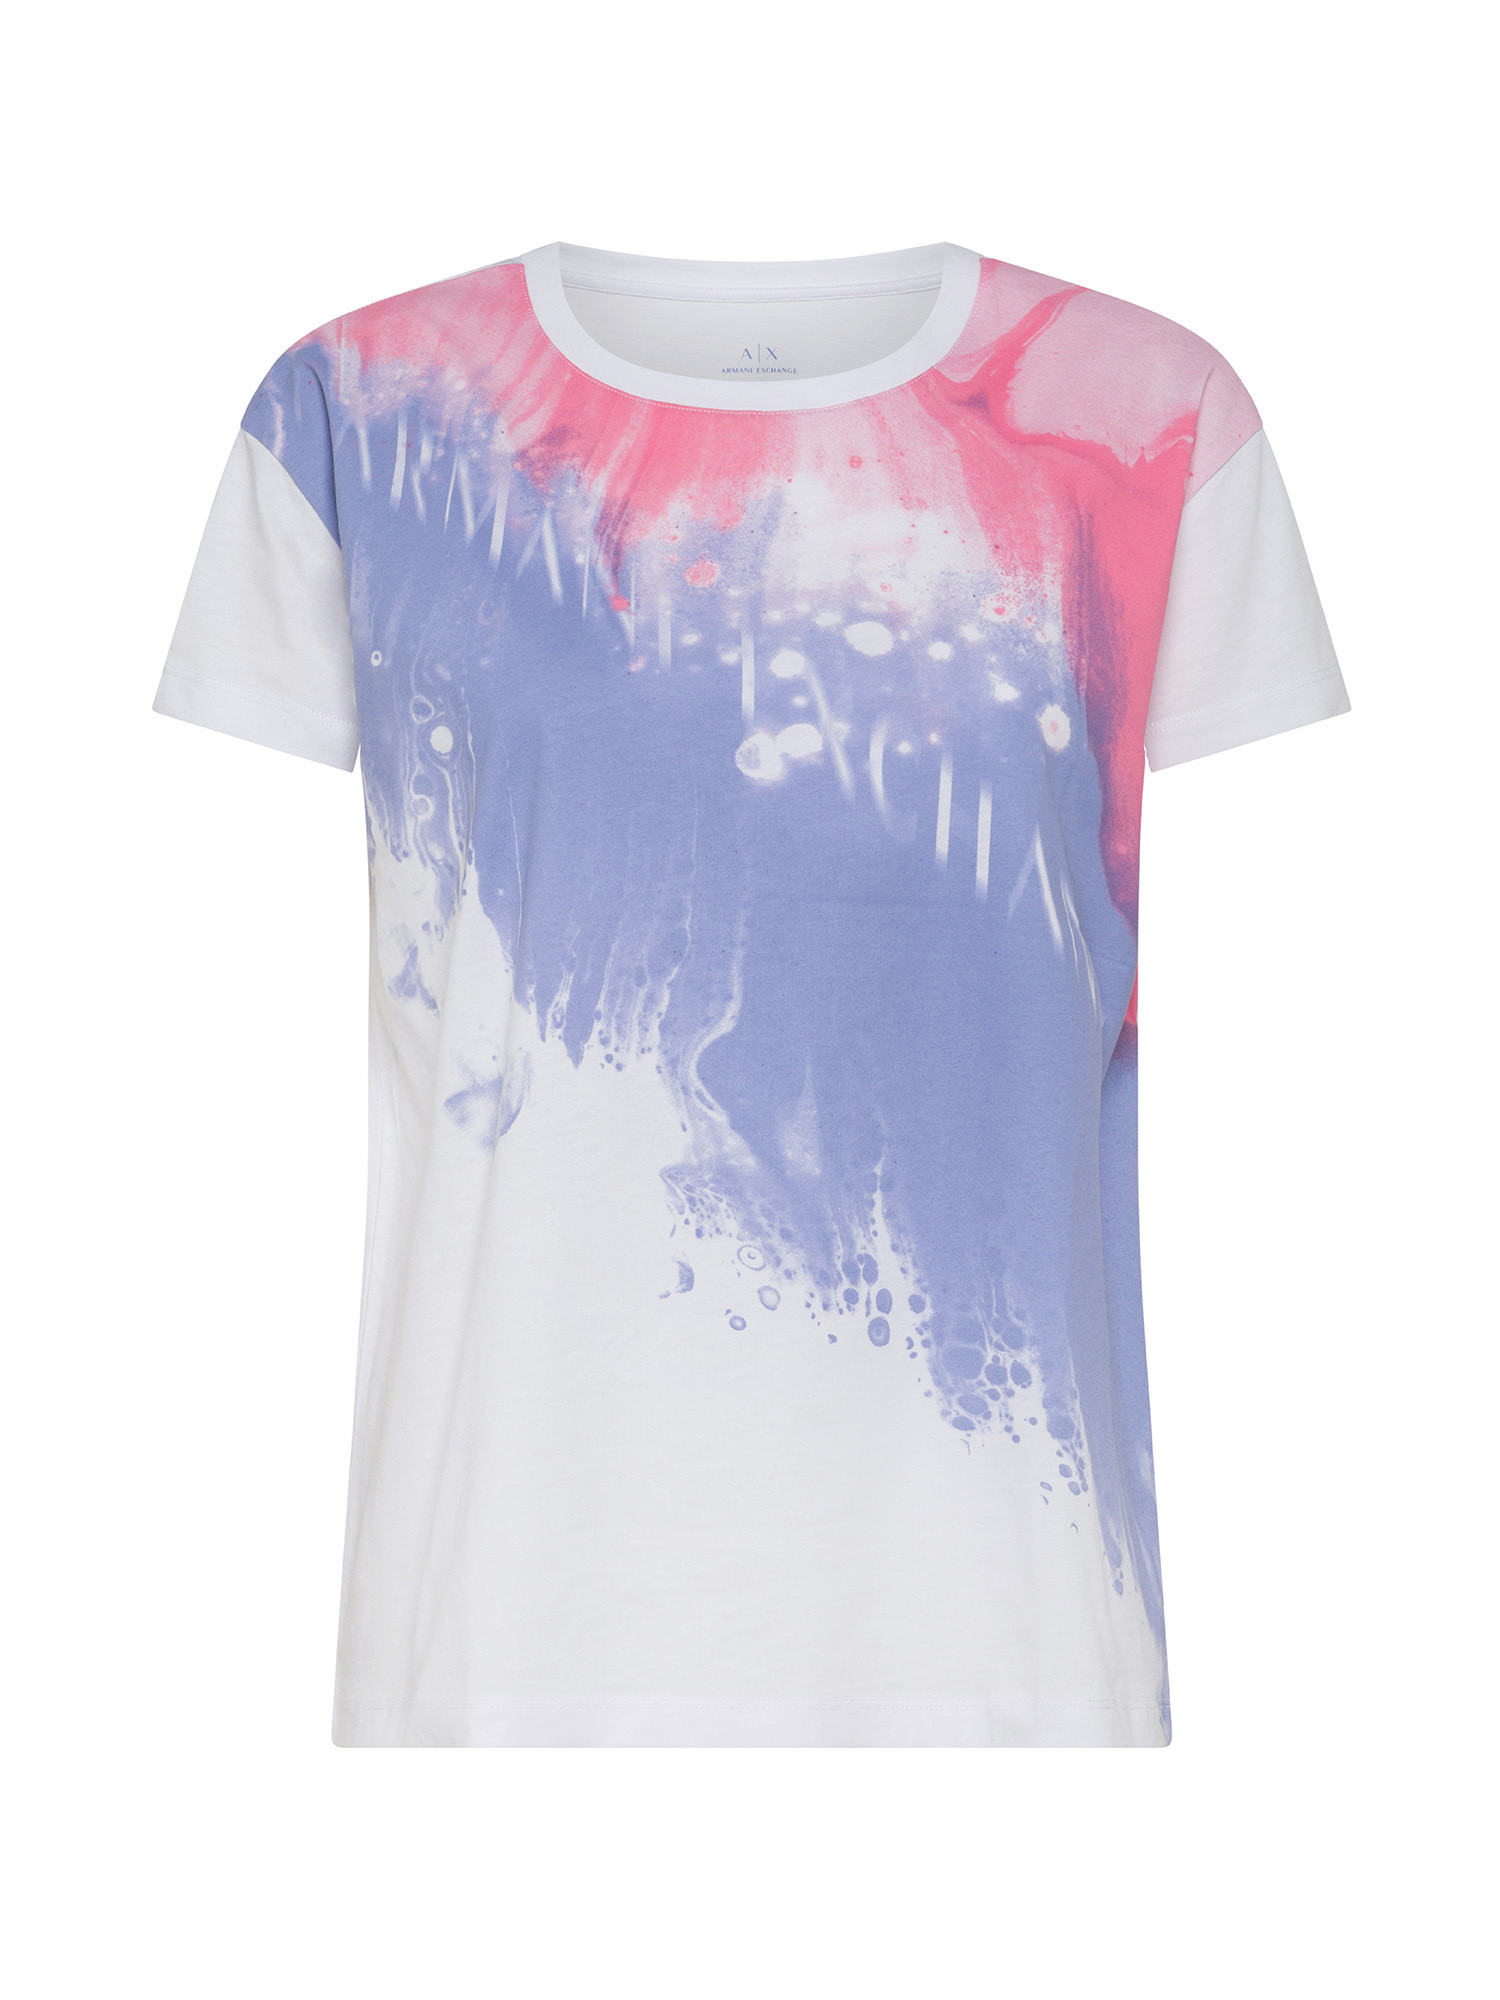 Armani Exchange - T-shirt in cotone con logo, Multicolor, large image number 0